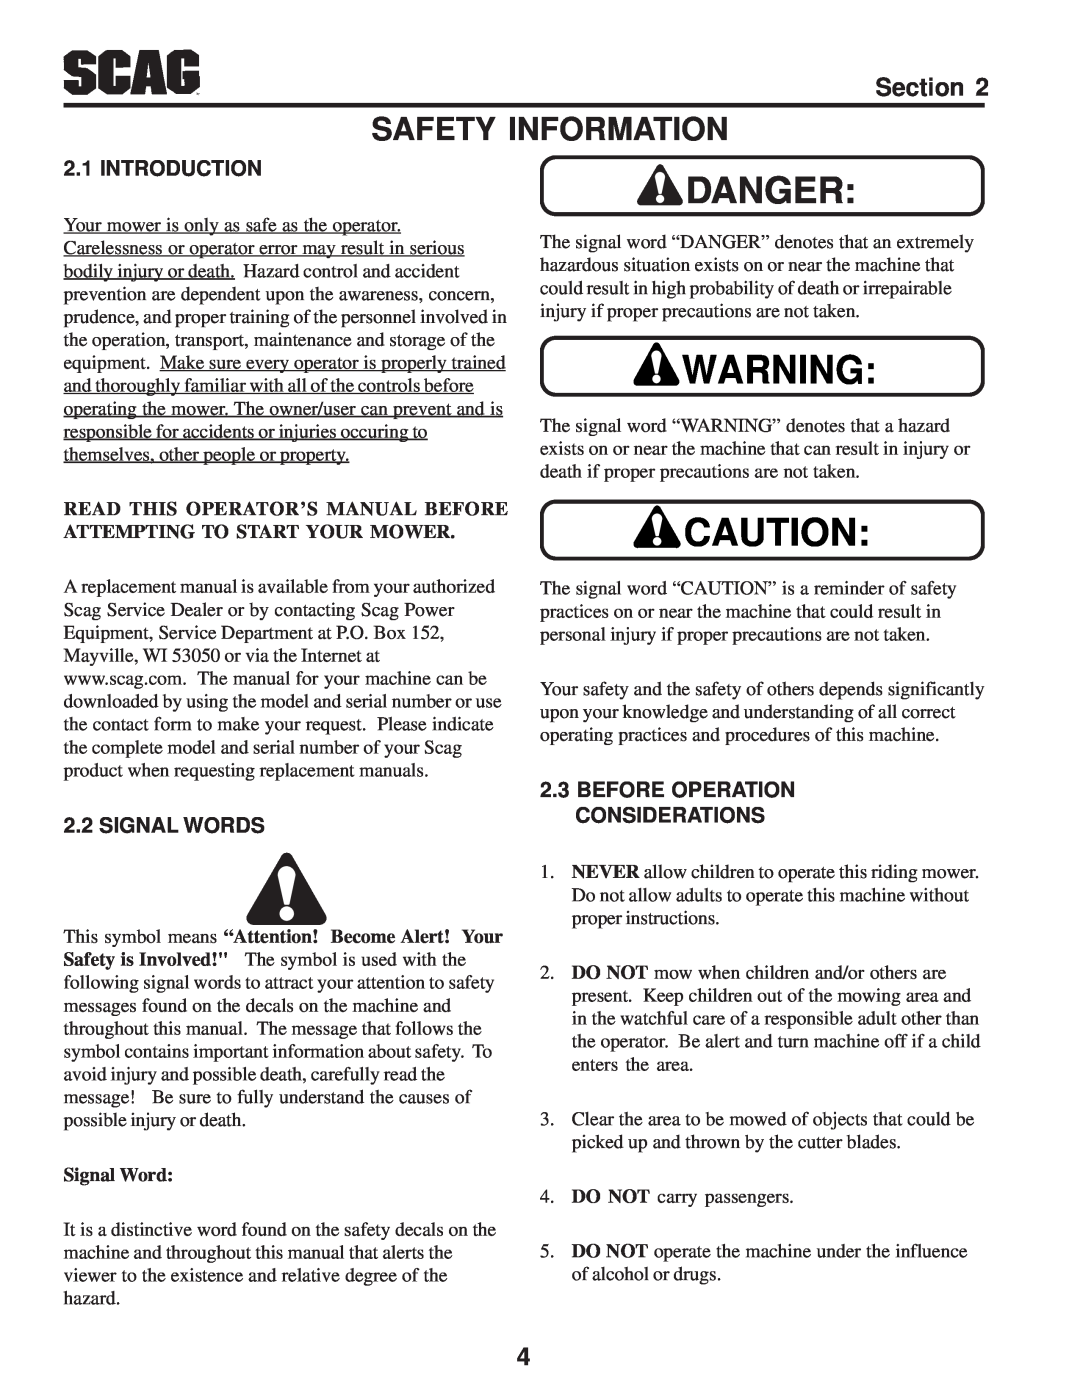 Scag Power Equipment SZC manual Safety Information, Introduction, Signal Words, Before Operation Considerations 